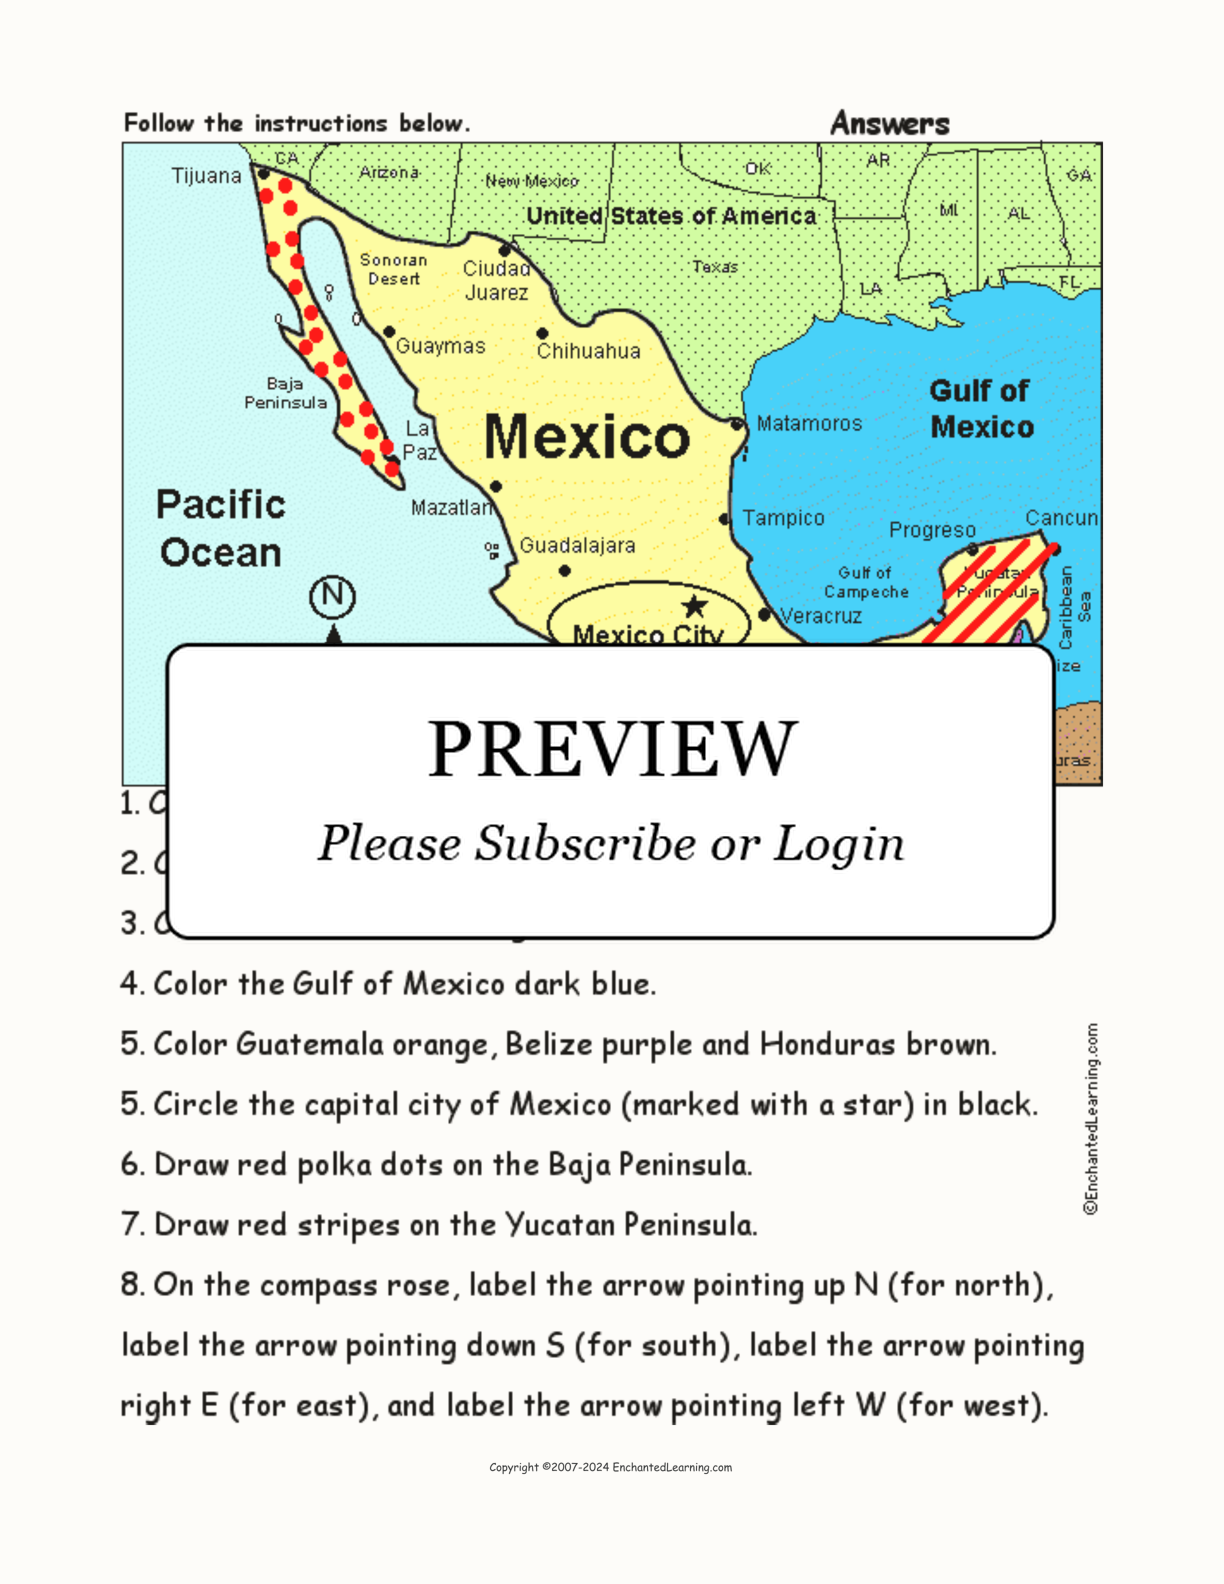 Mexico - Follow the Instructions interactive worksheet page 2